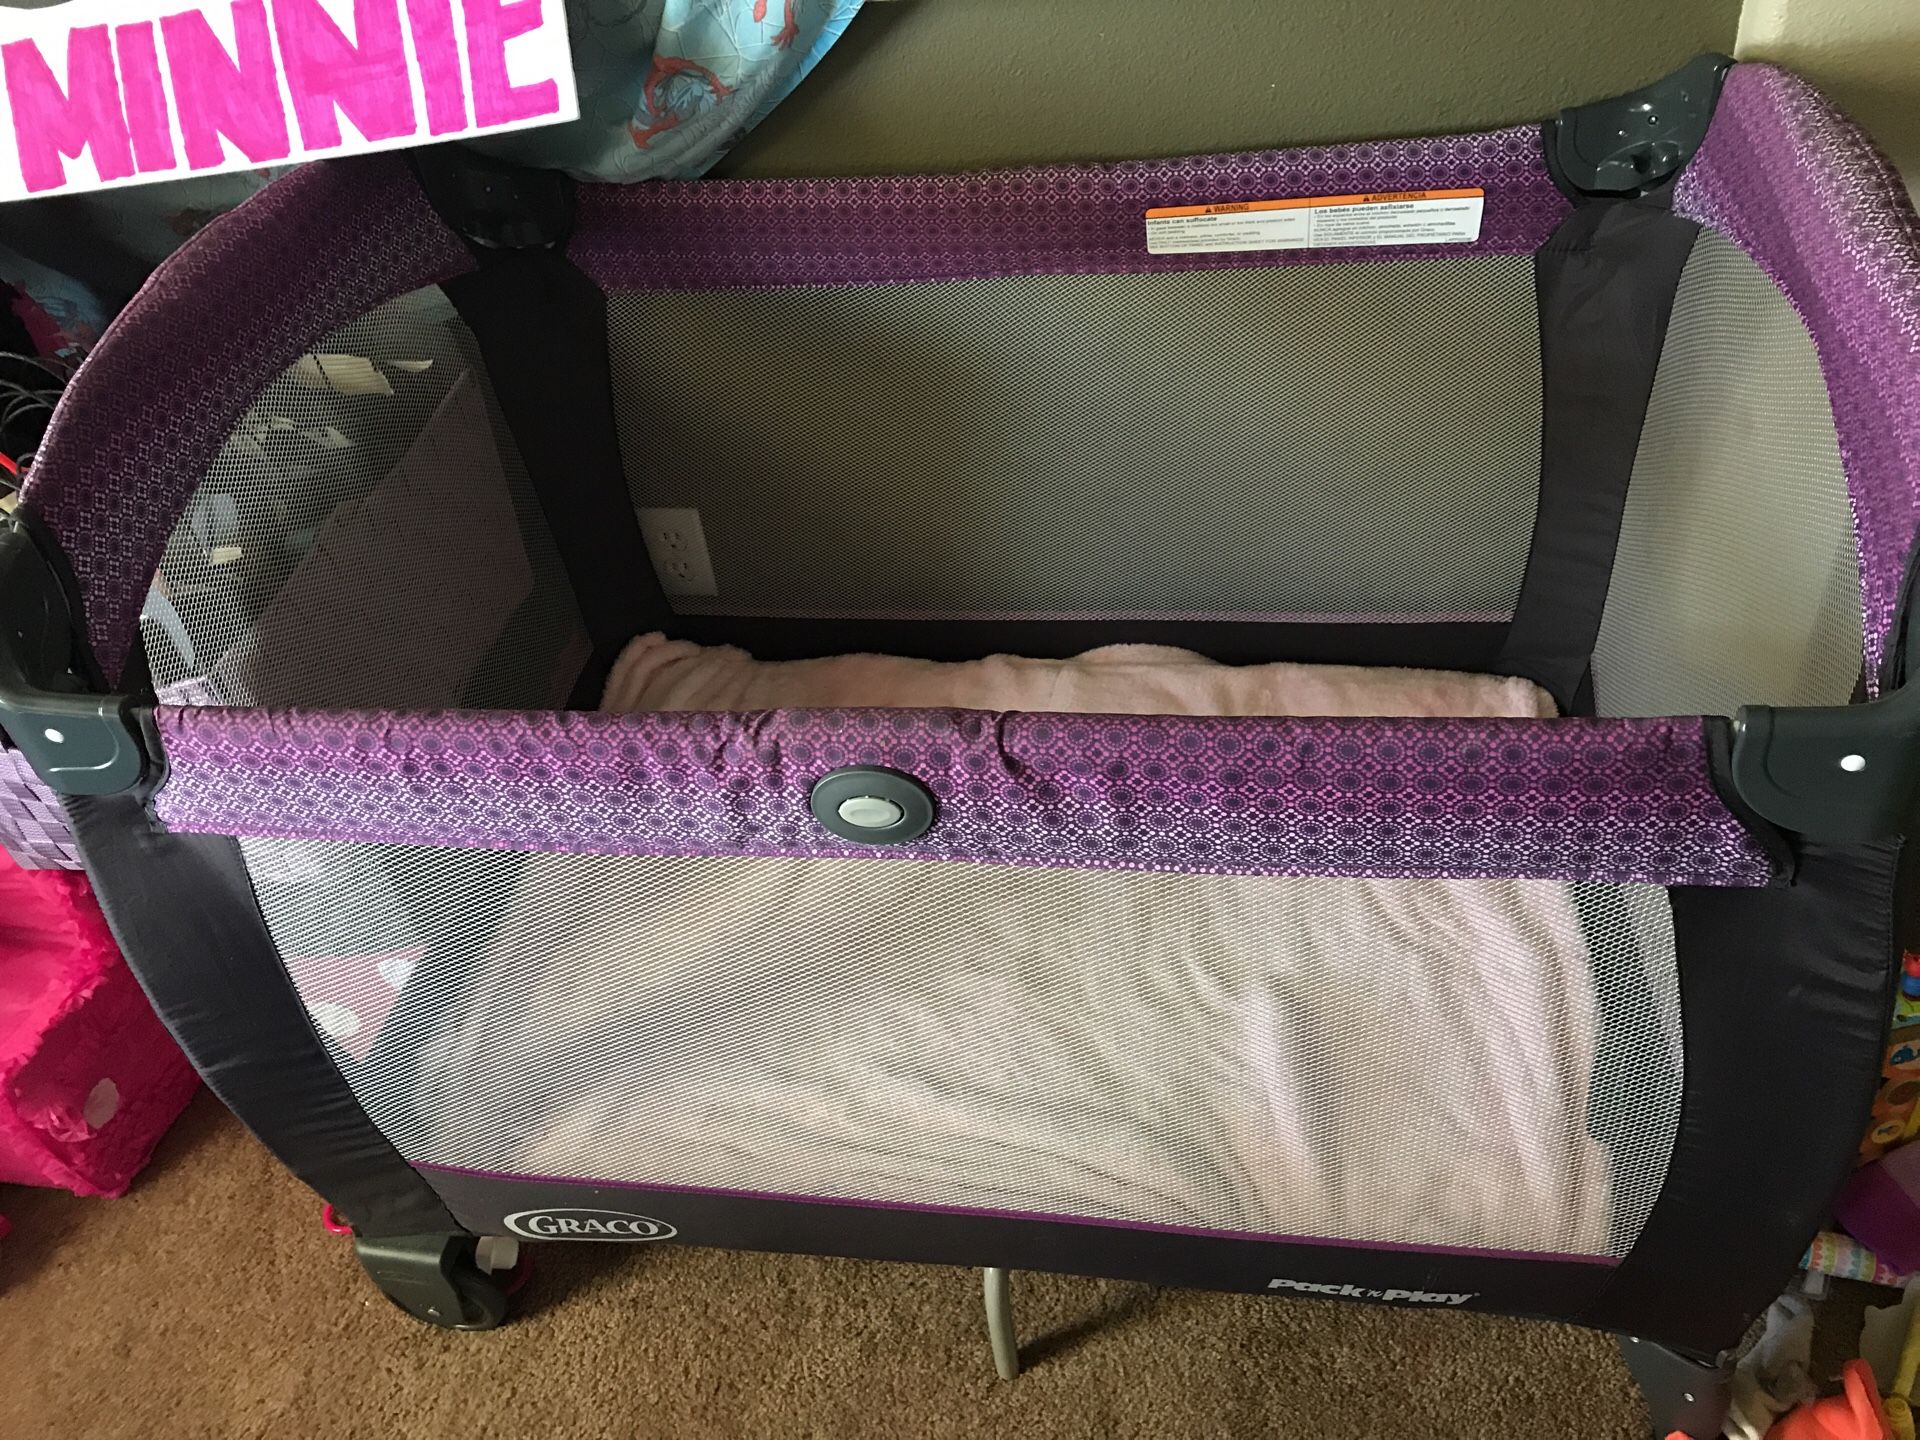 A crib car seat and stroller